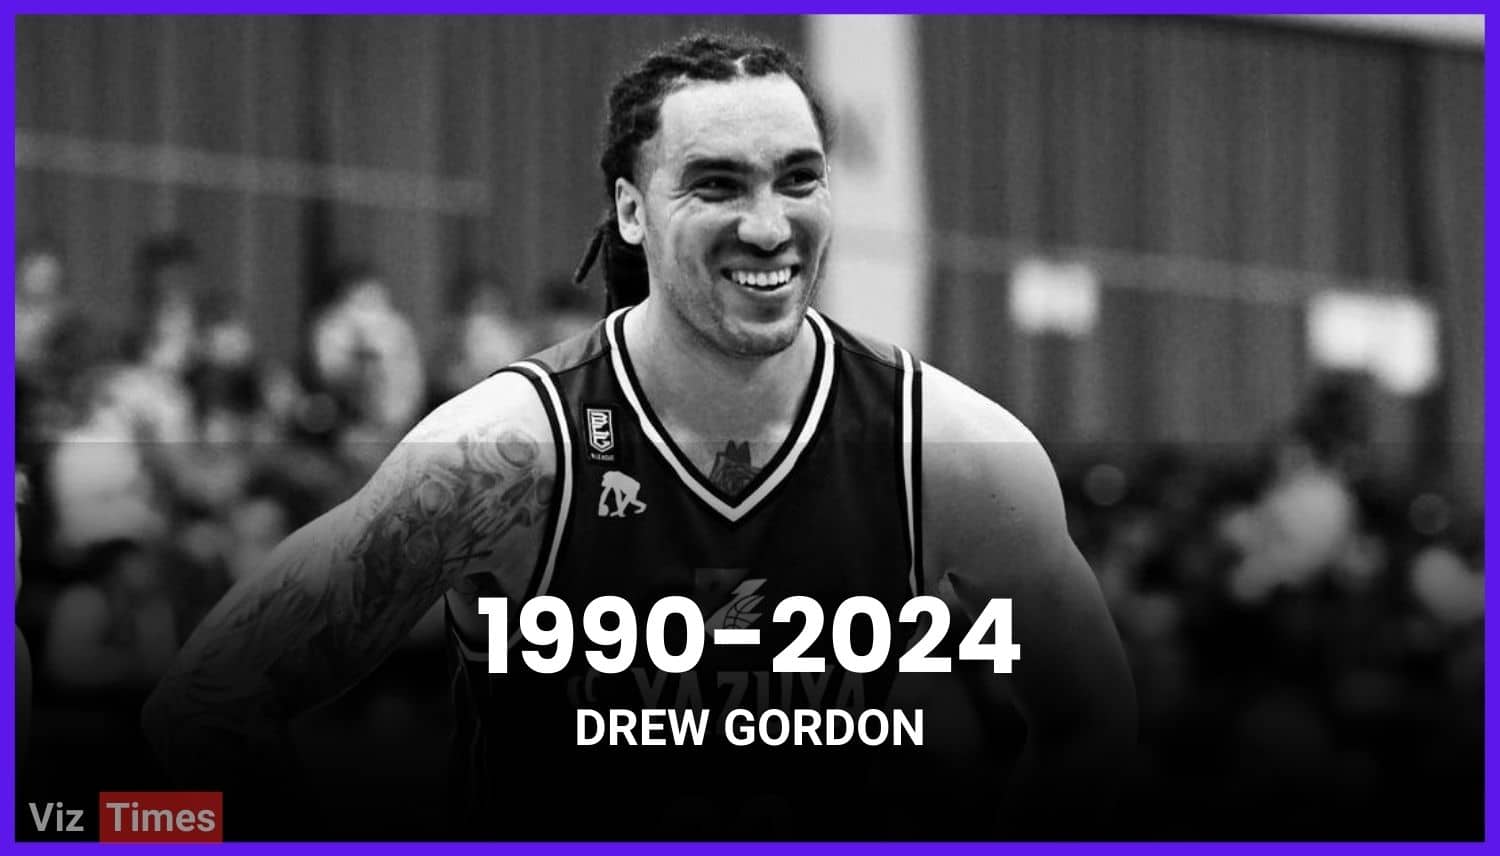 Sad News: Former NBA player and Bay Area native, Gordon, dies at 33 in a car accident.